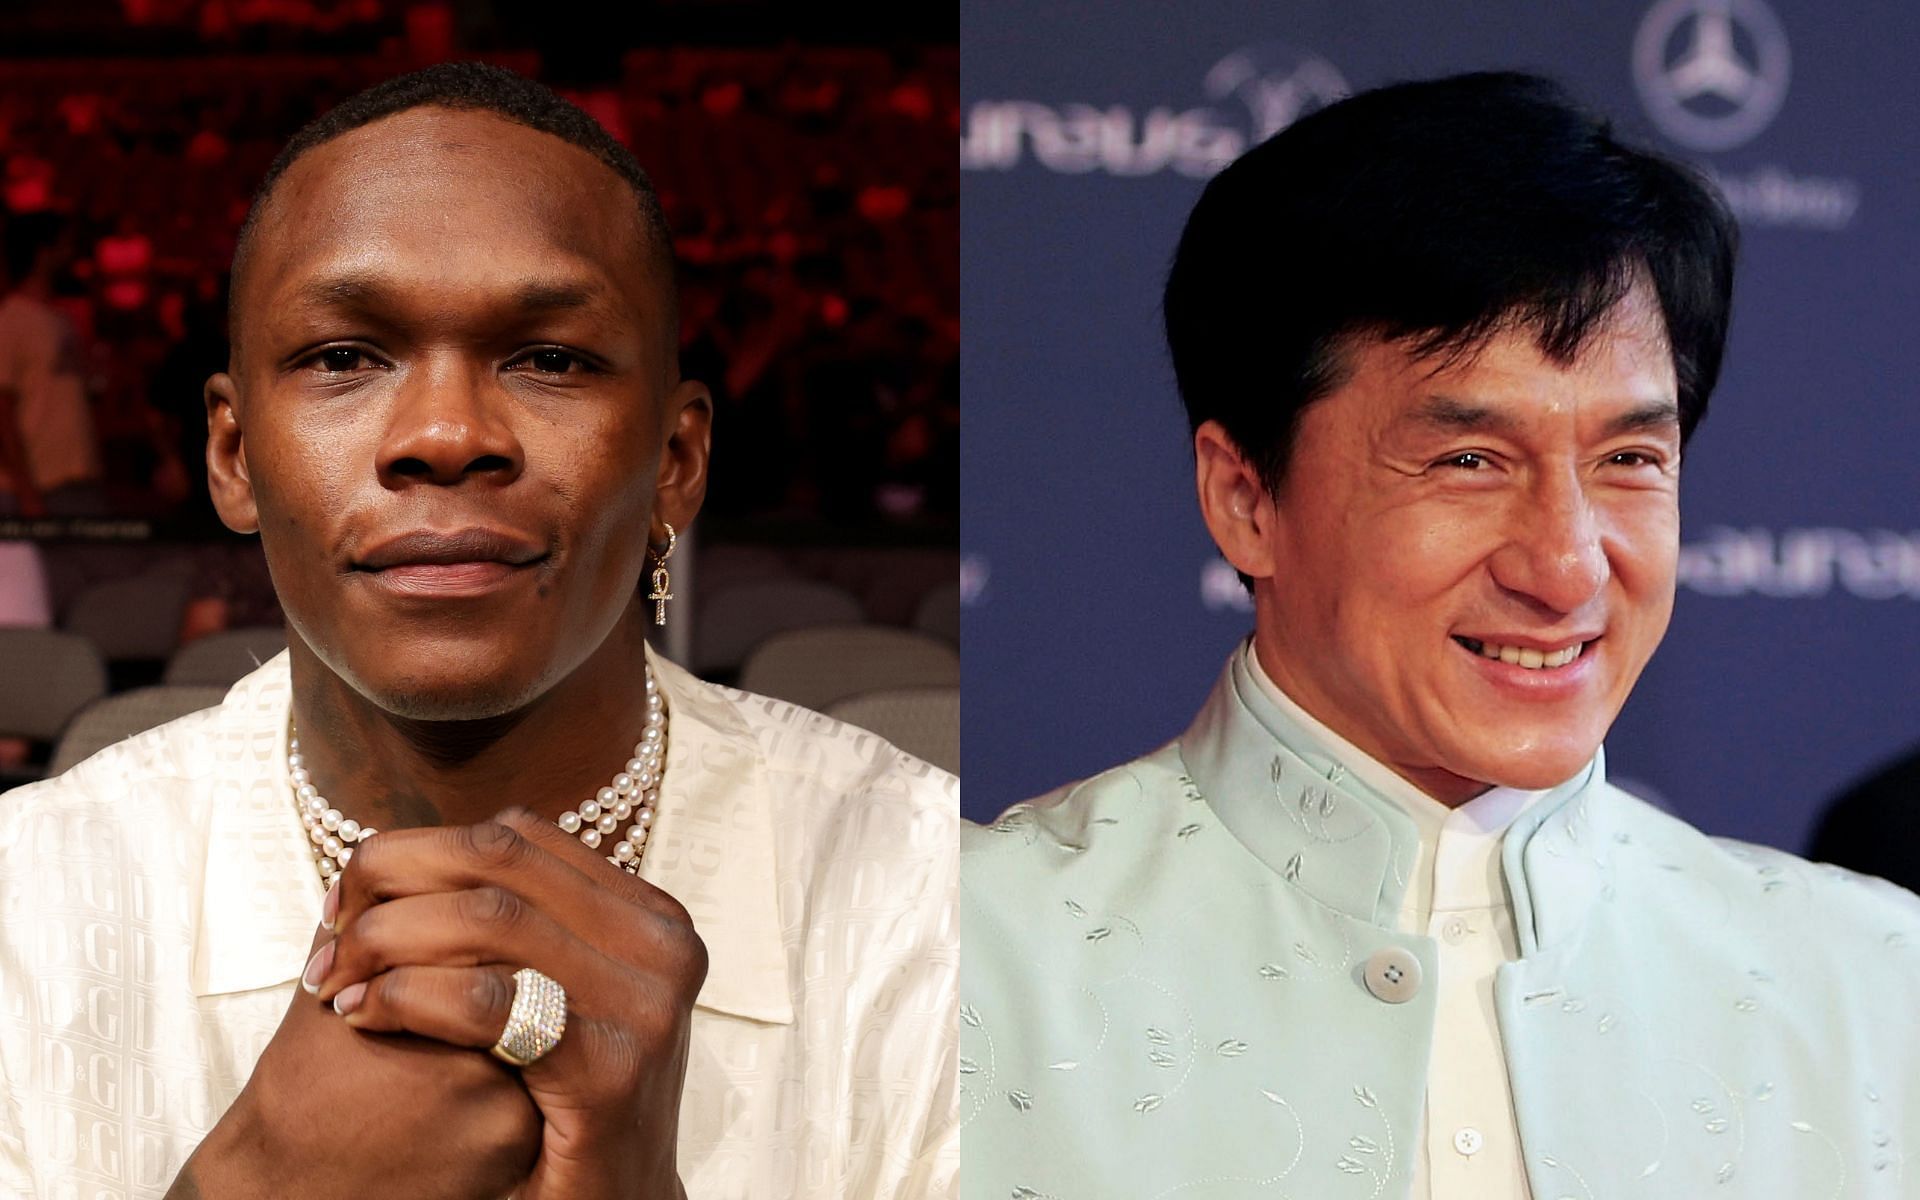 Israel Adesanya (left) and Jackie Chan (right). [via Getty Images]